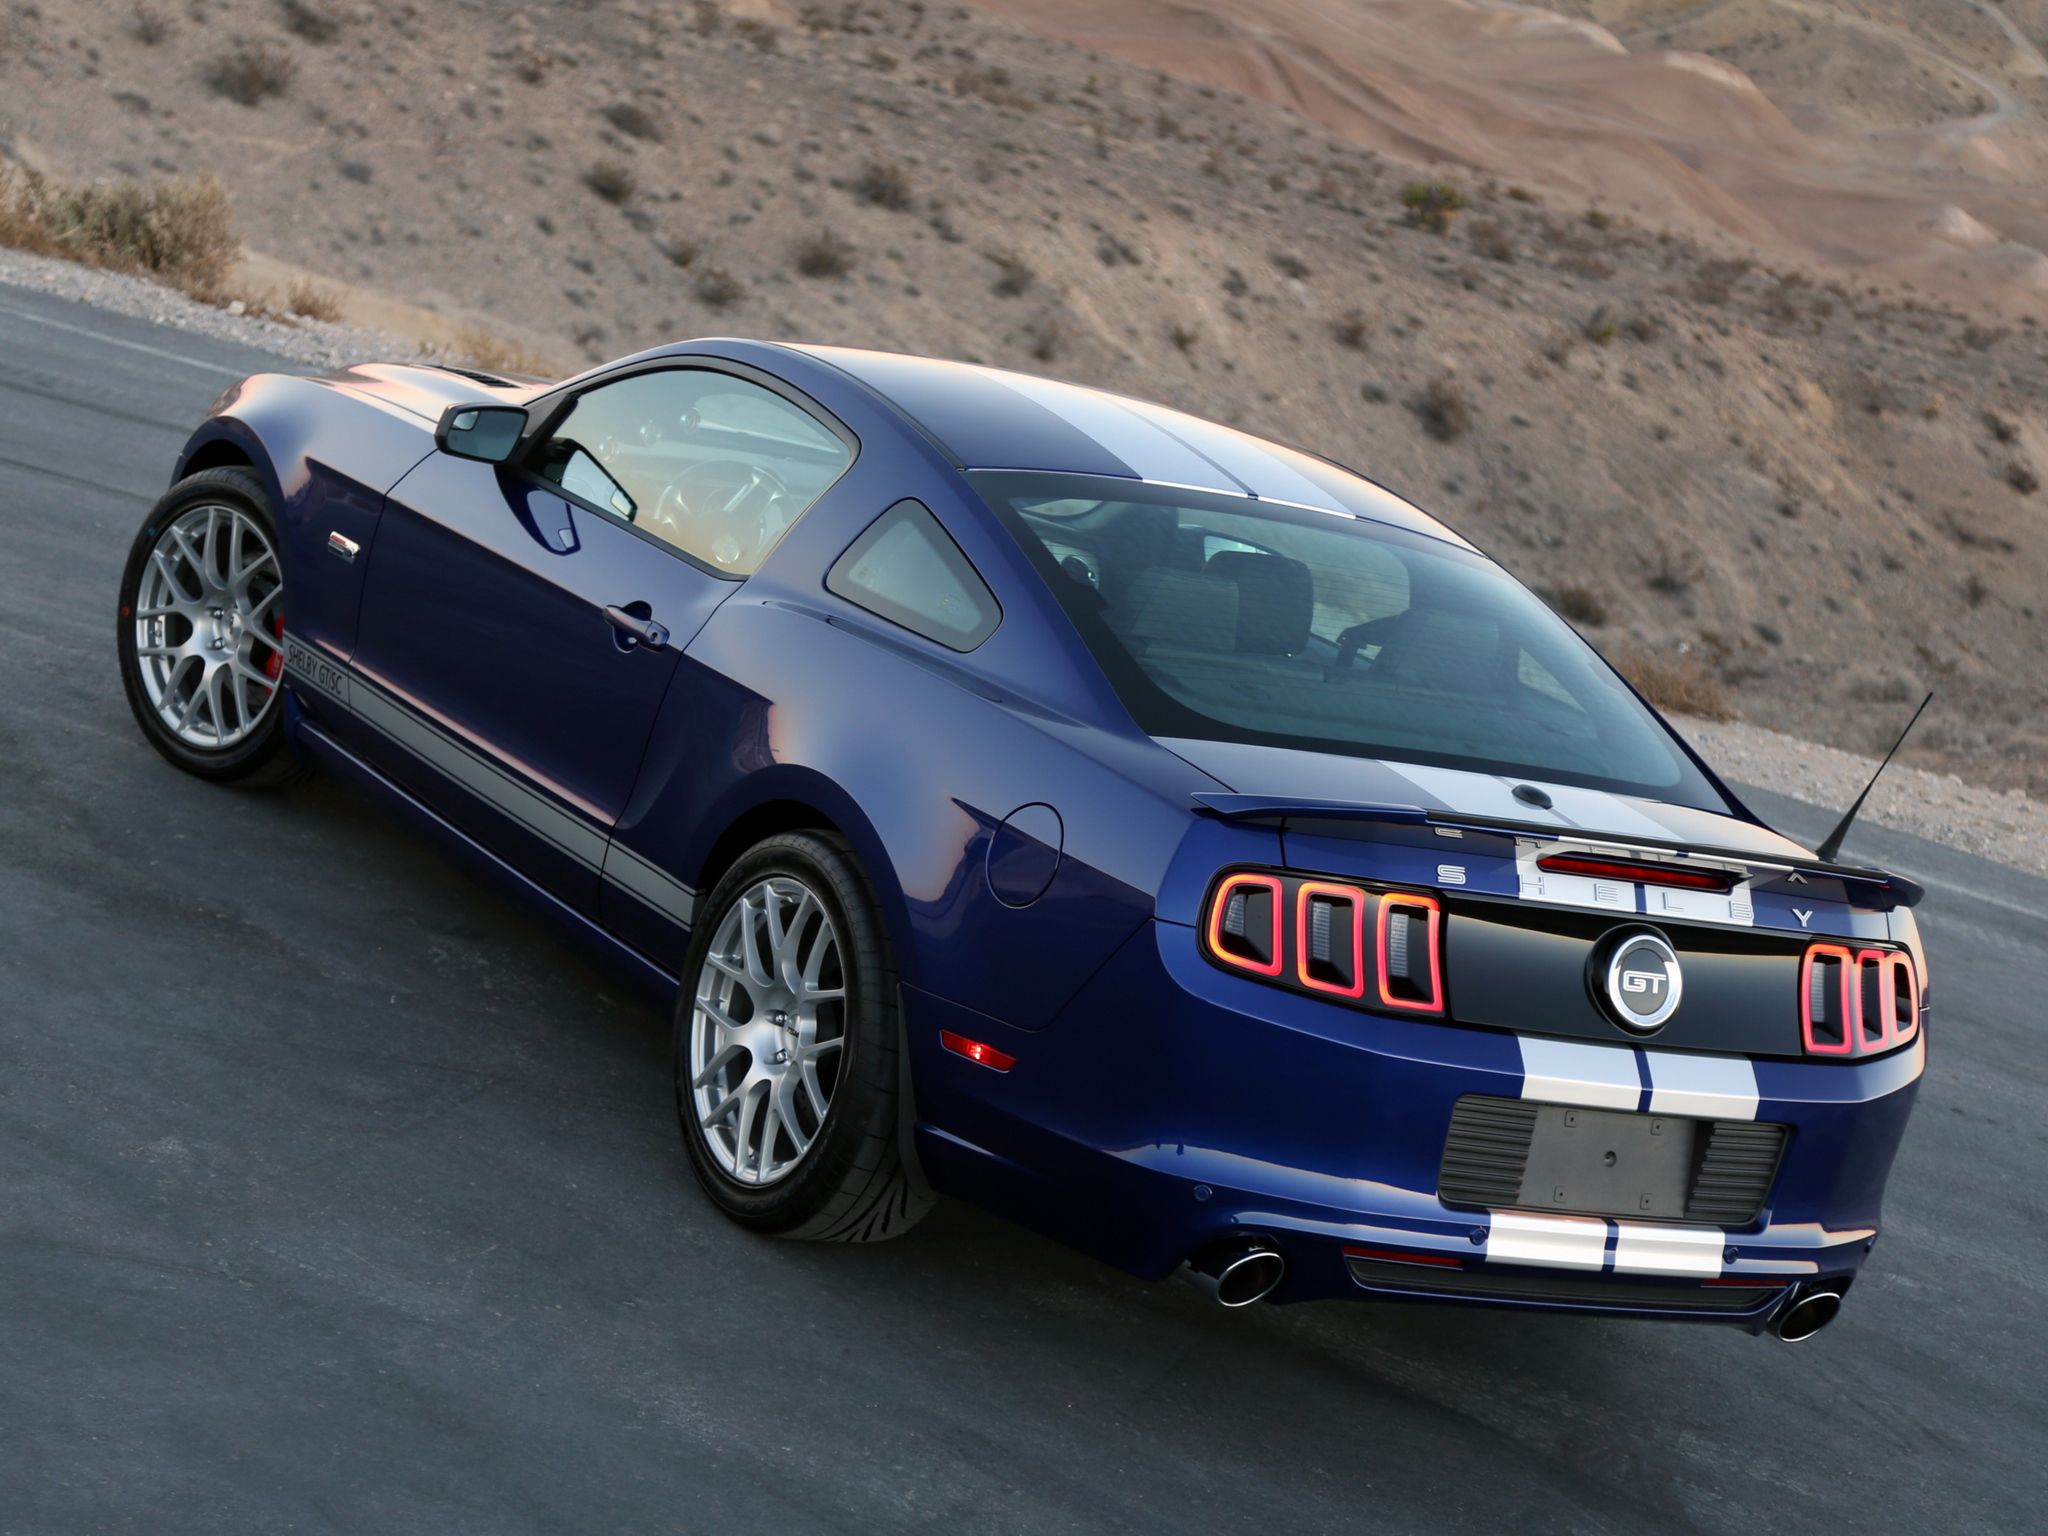 2014, Shelby, Ford, Mustang, Gt sc, Muscle Wallpaper